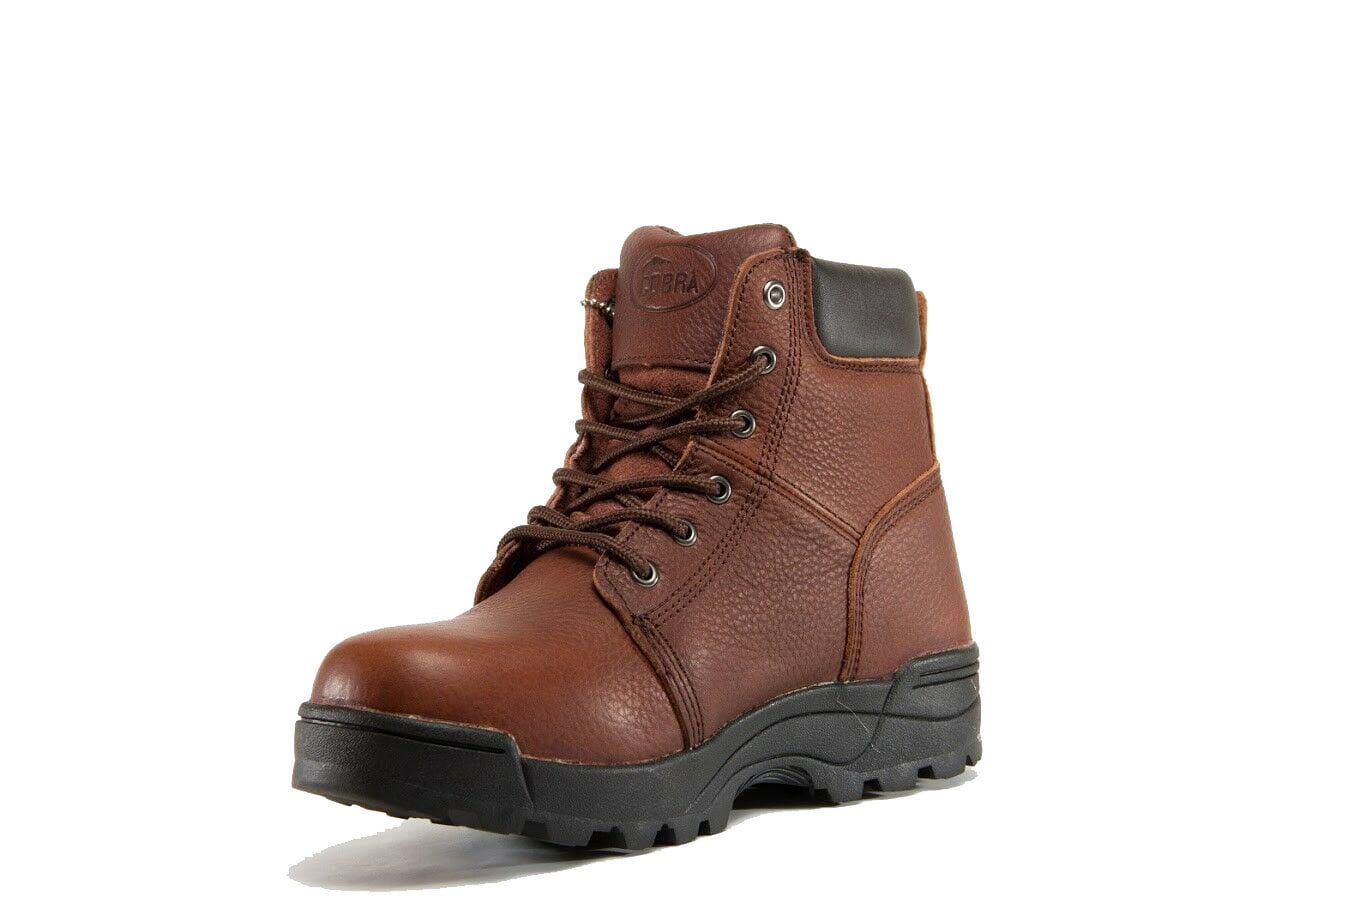 Cobra Men's Work Boot Genuine Leather C1121 Brown Available in Steel Toe 